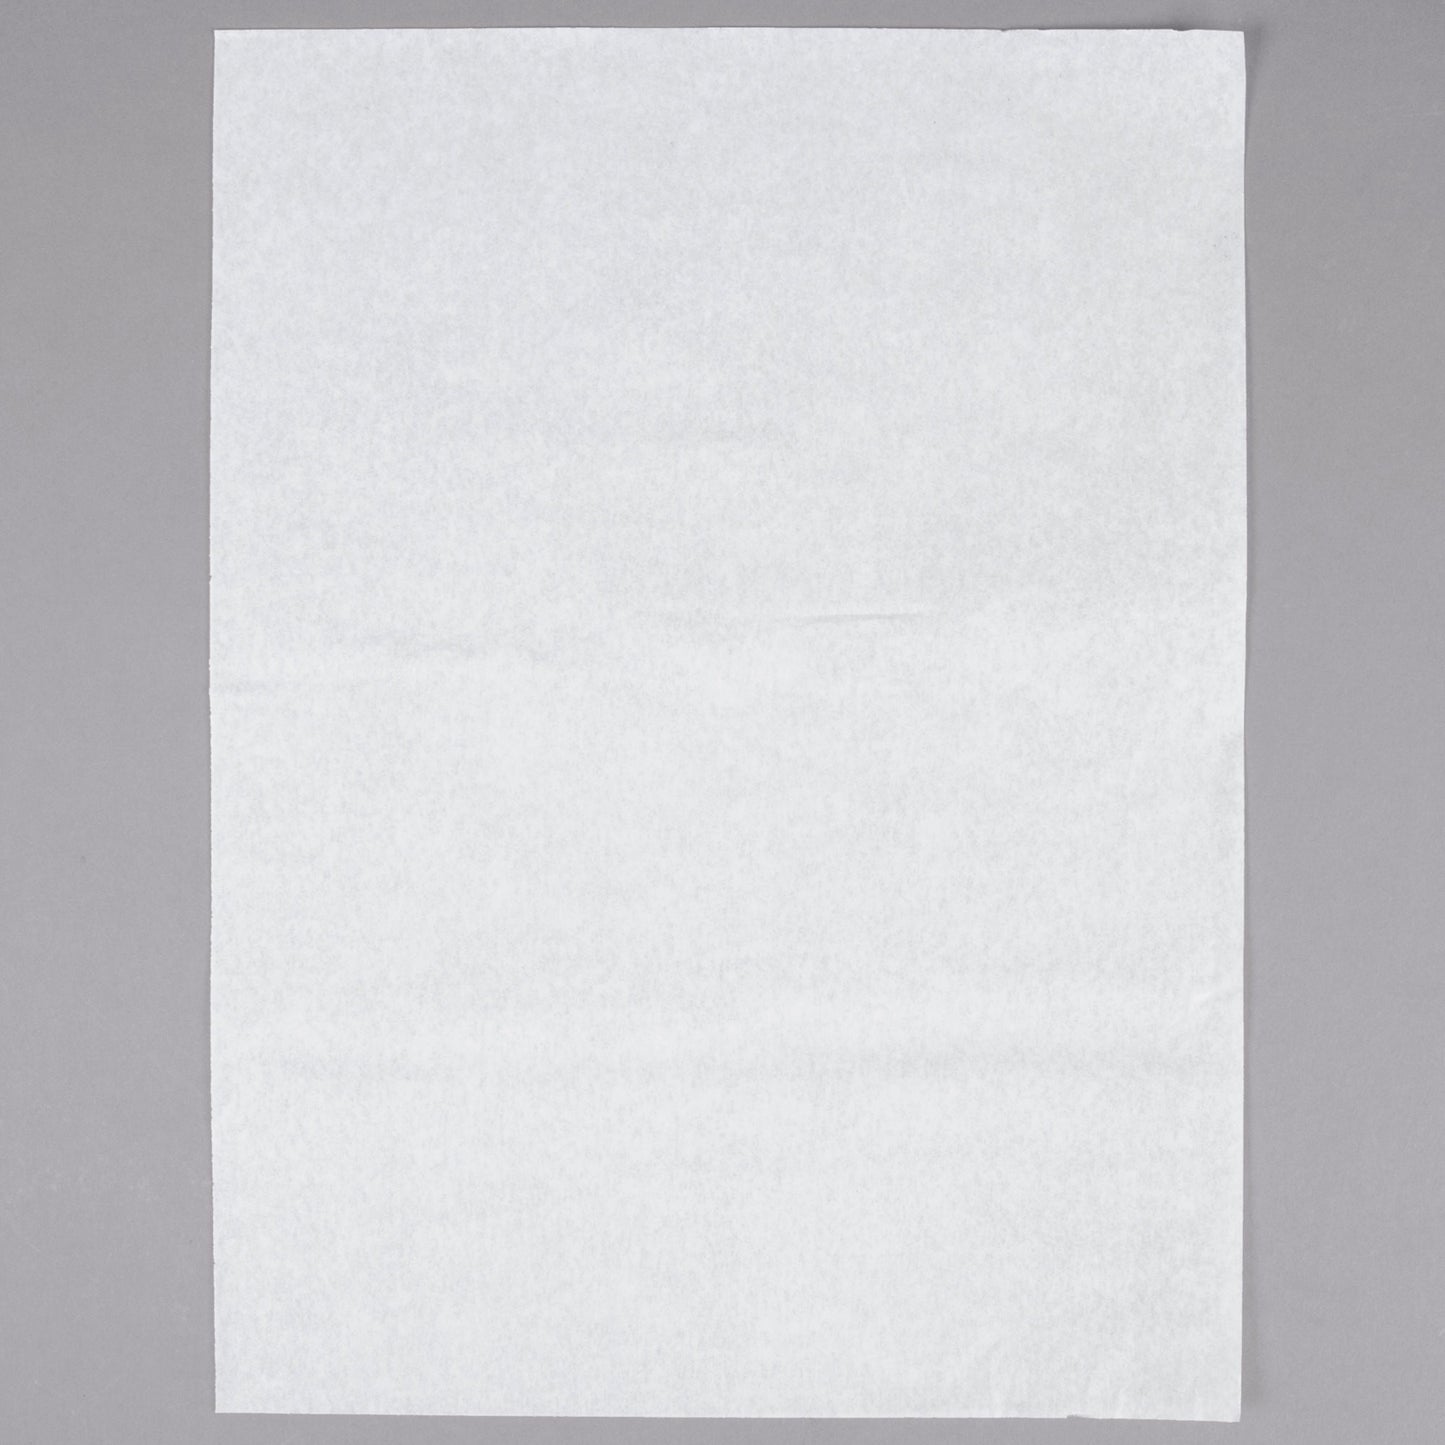 Quilon-Coated Parchment Paper - 24" x 16" Full Sheet - White